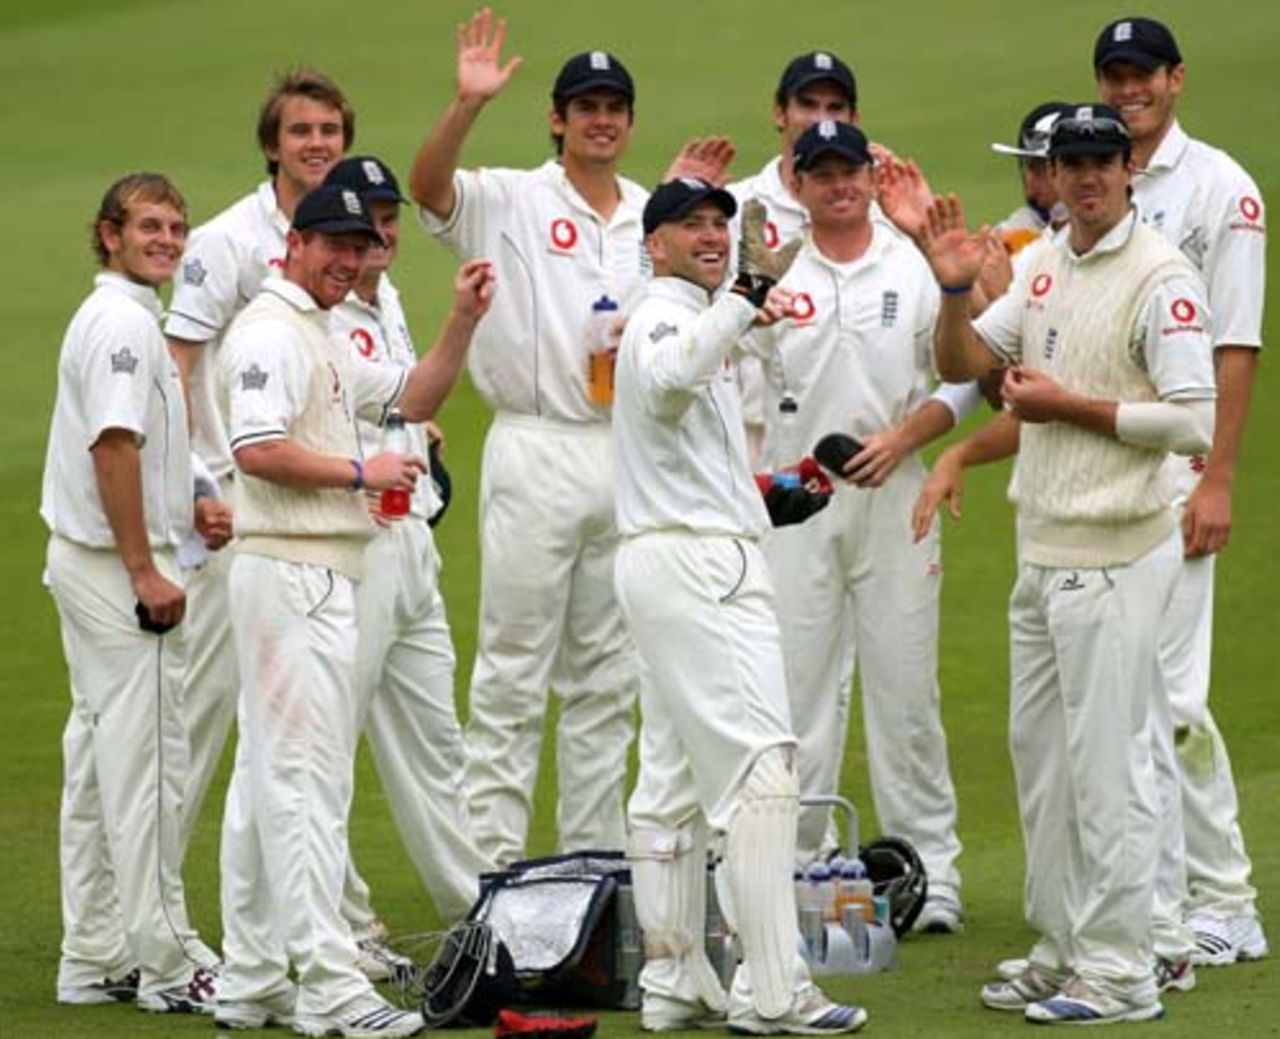 The England players wave out to the stands while taking drinks, England v India, 1st Test, Lord's, 5th day, July 23, 2007